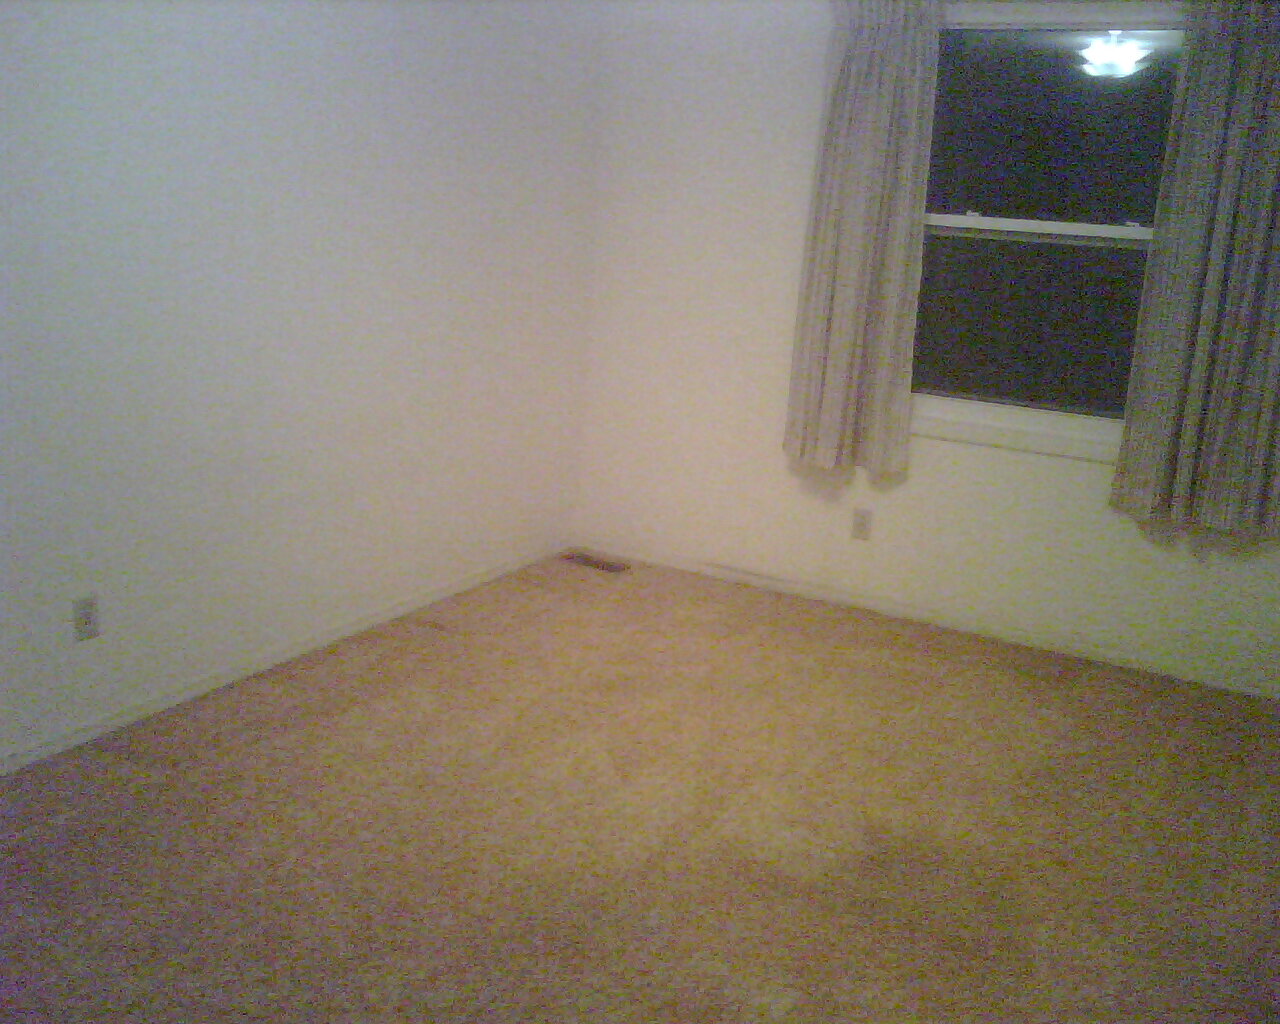 Upstairs (2nd Floor) bedroom 2's back end as seen from the room's entrance